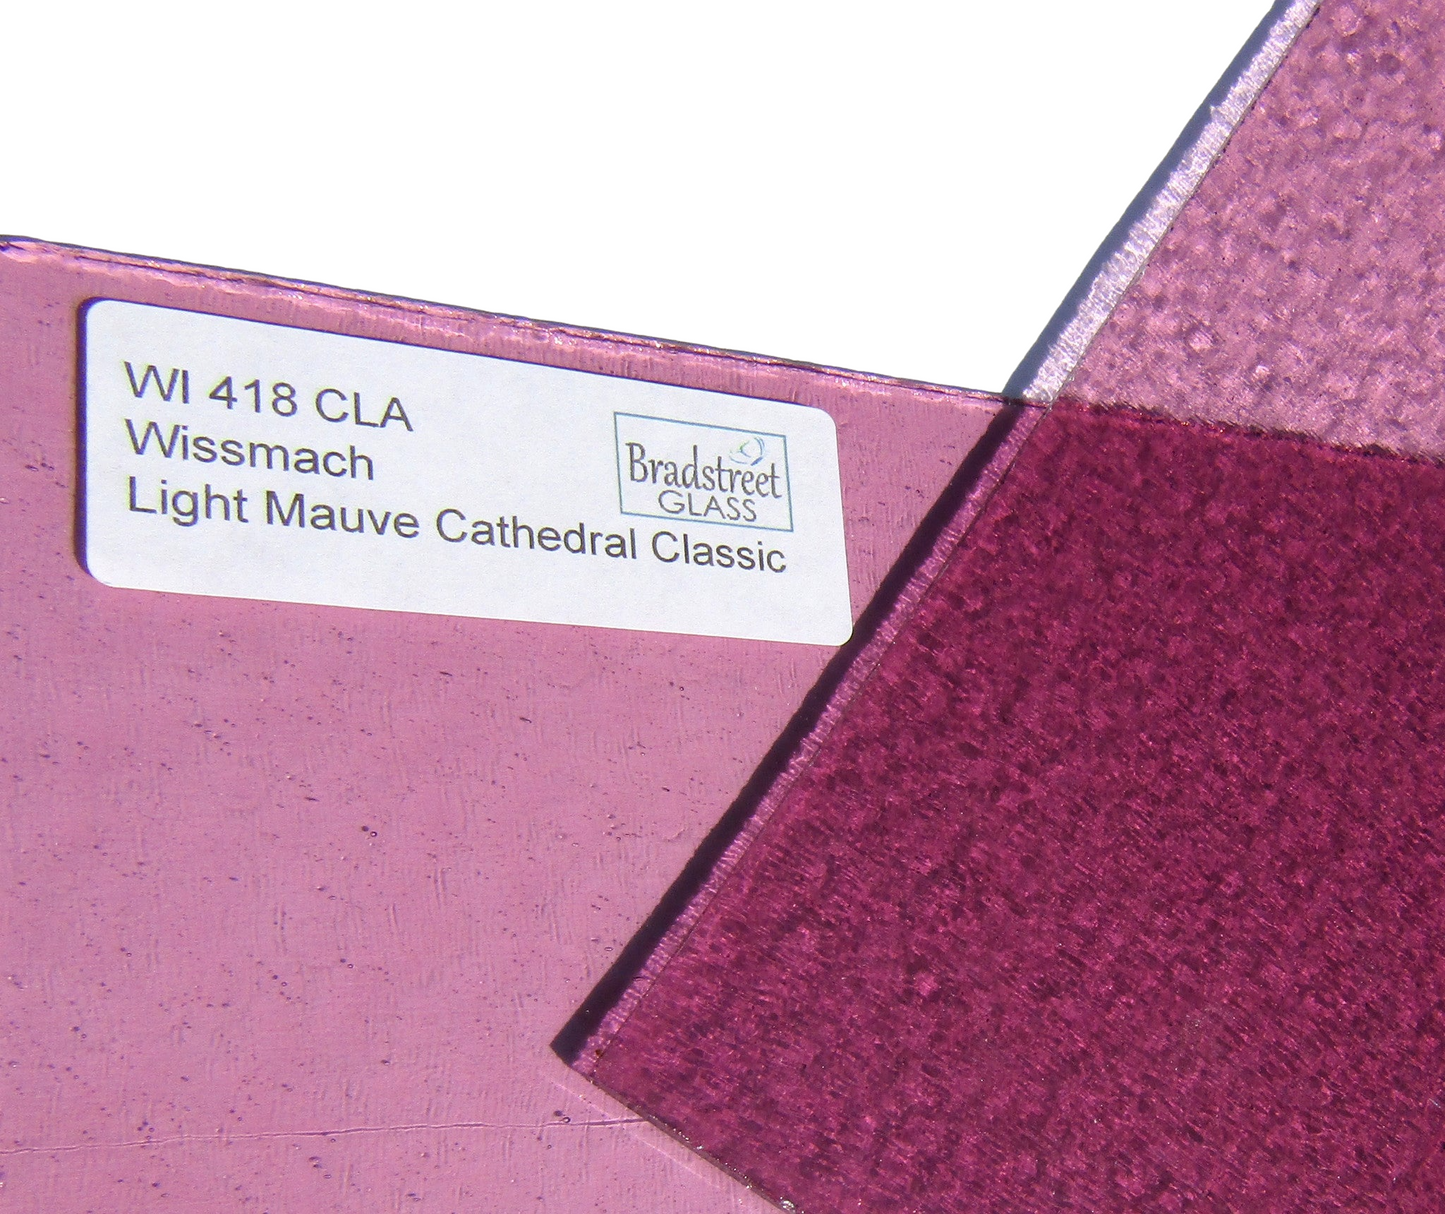 Light Mauve Stained Glass Sheet Wissmach 418 CLA Corella Classic Cathedral